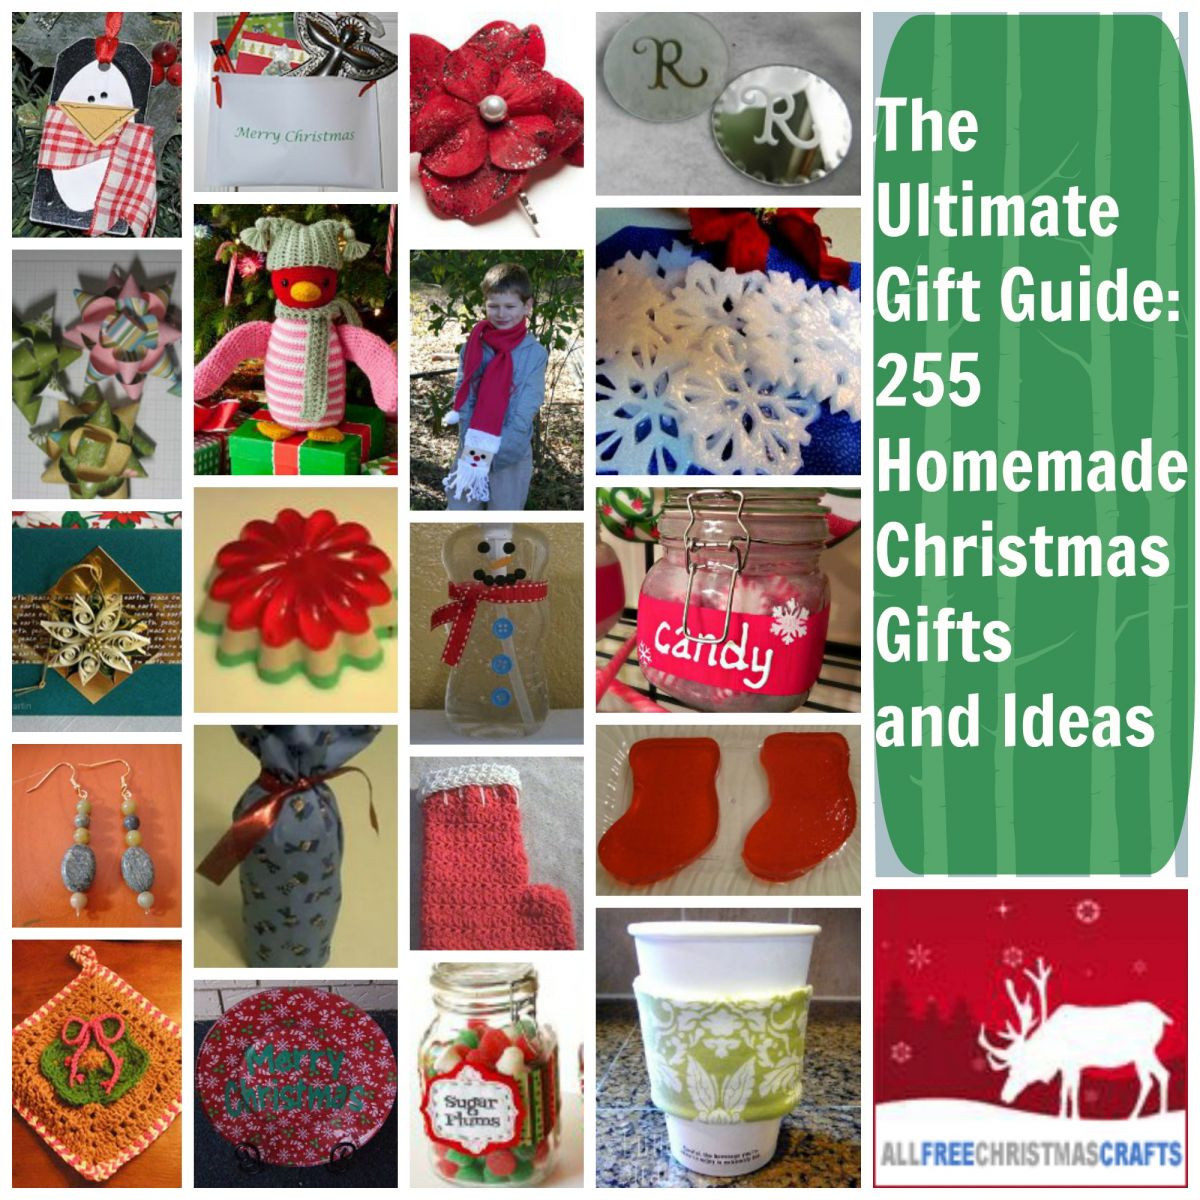 Christmas Craft Gift Ideas
 The Ultimate Gift Guide 255 Homemade Christmas Gifts and